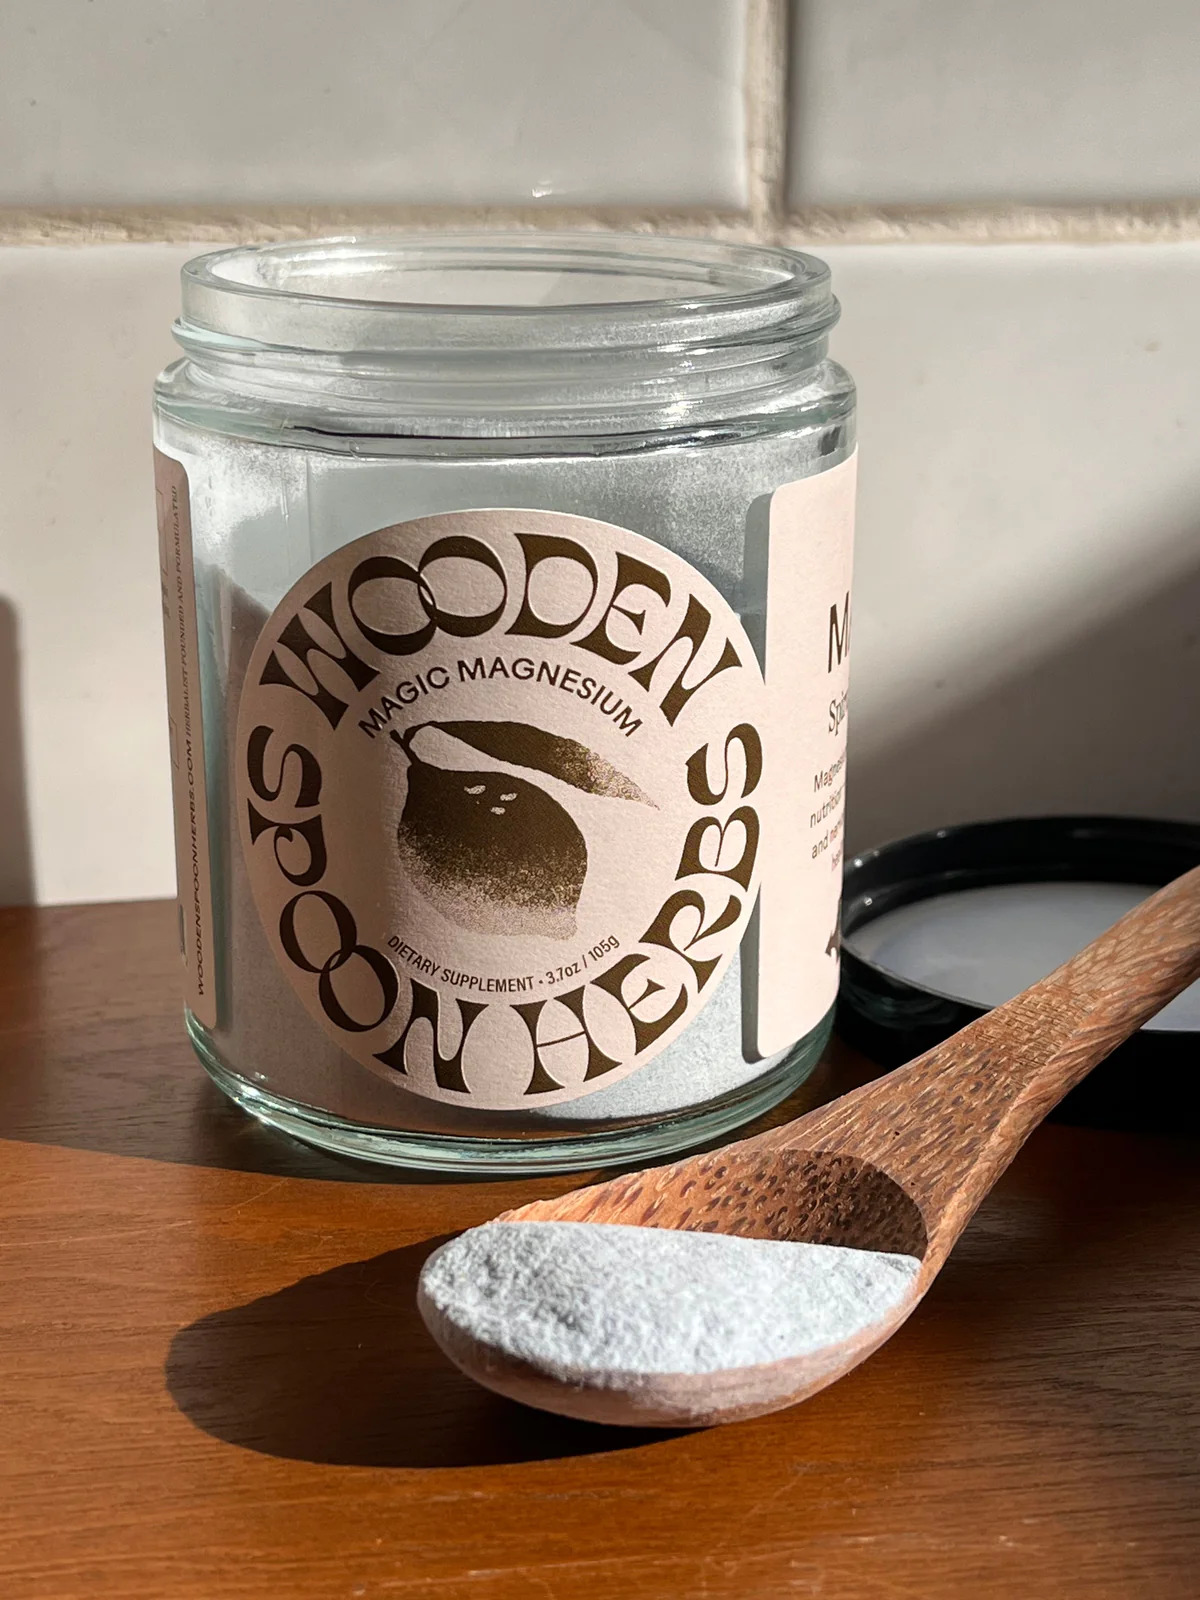 Wooden Spoon Herbs jar next to a spoon with powder in it